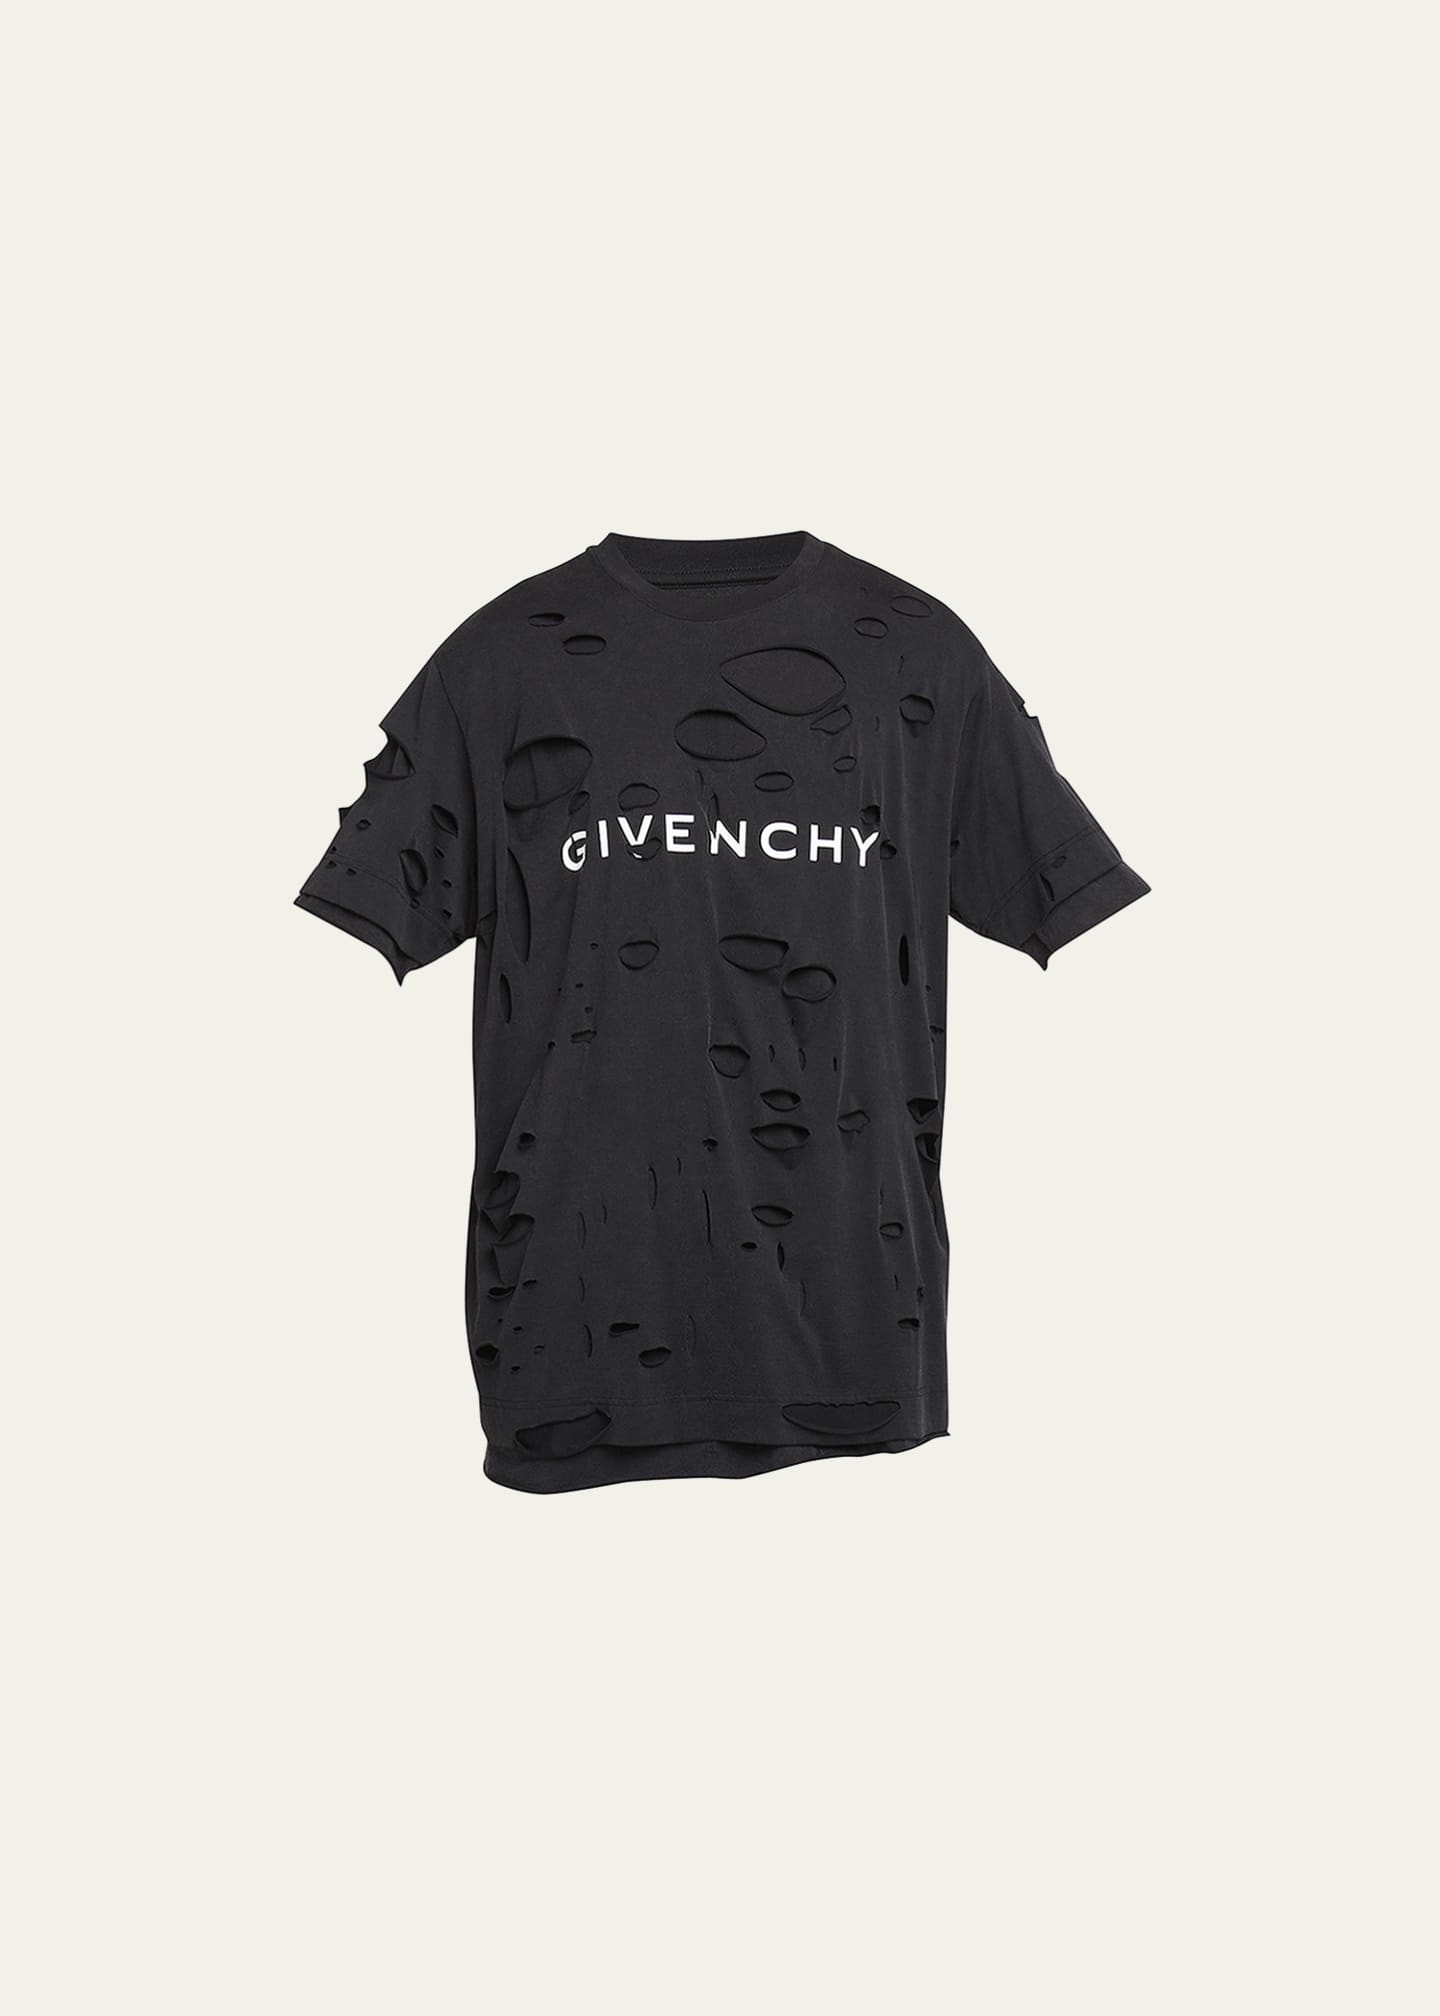 Givenchy Men's Destroyed Double-Layer T-Shirt - Bergdorf Goodman